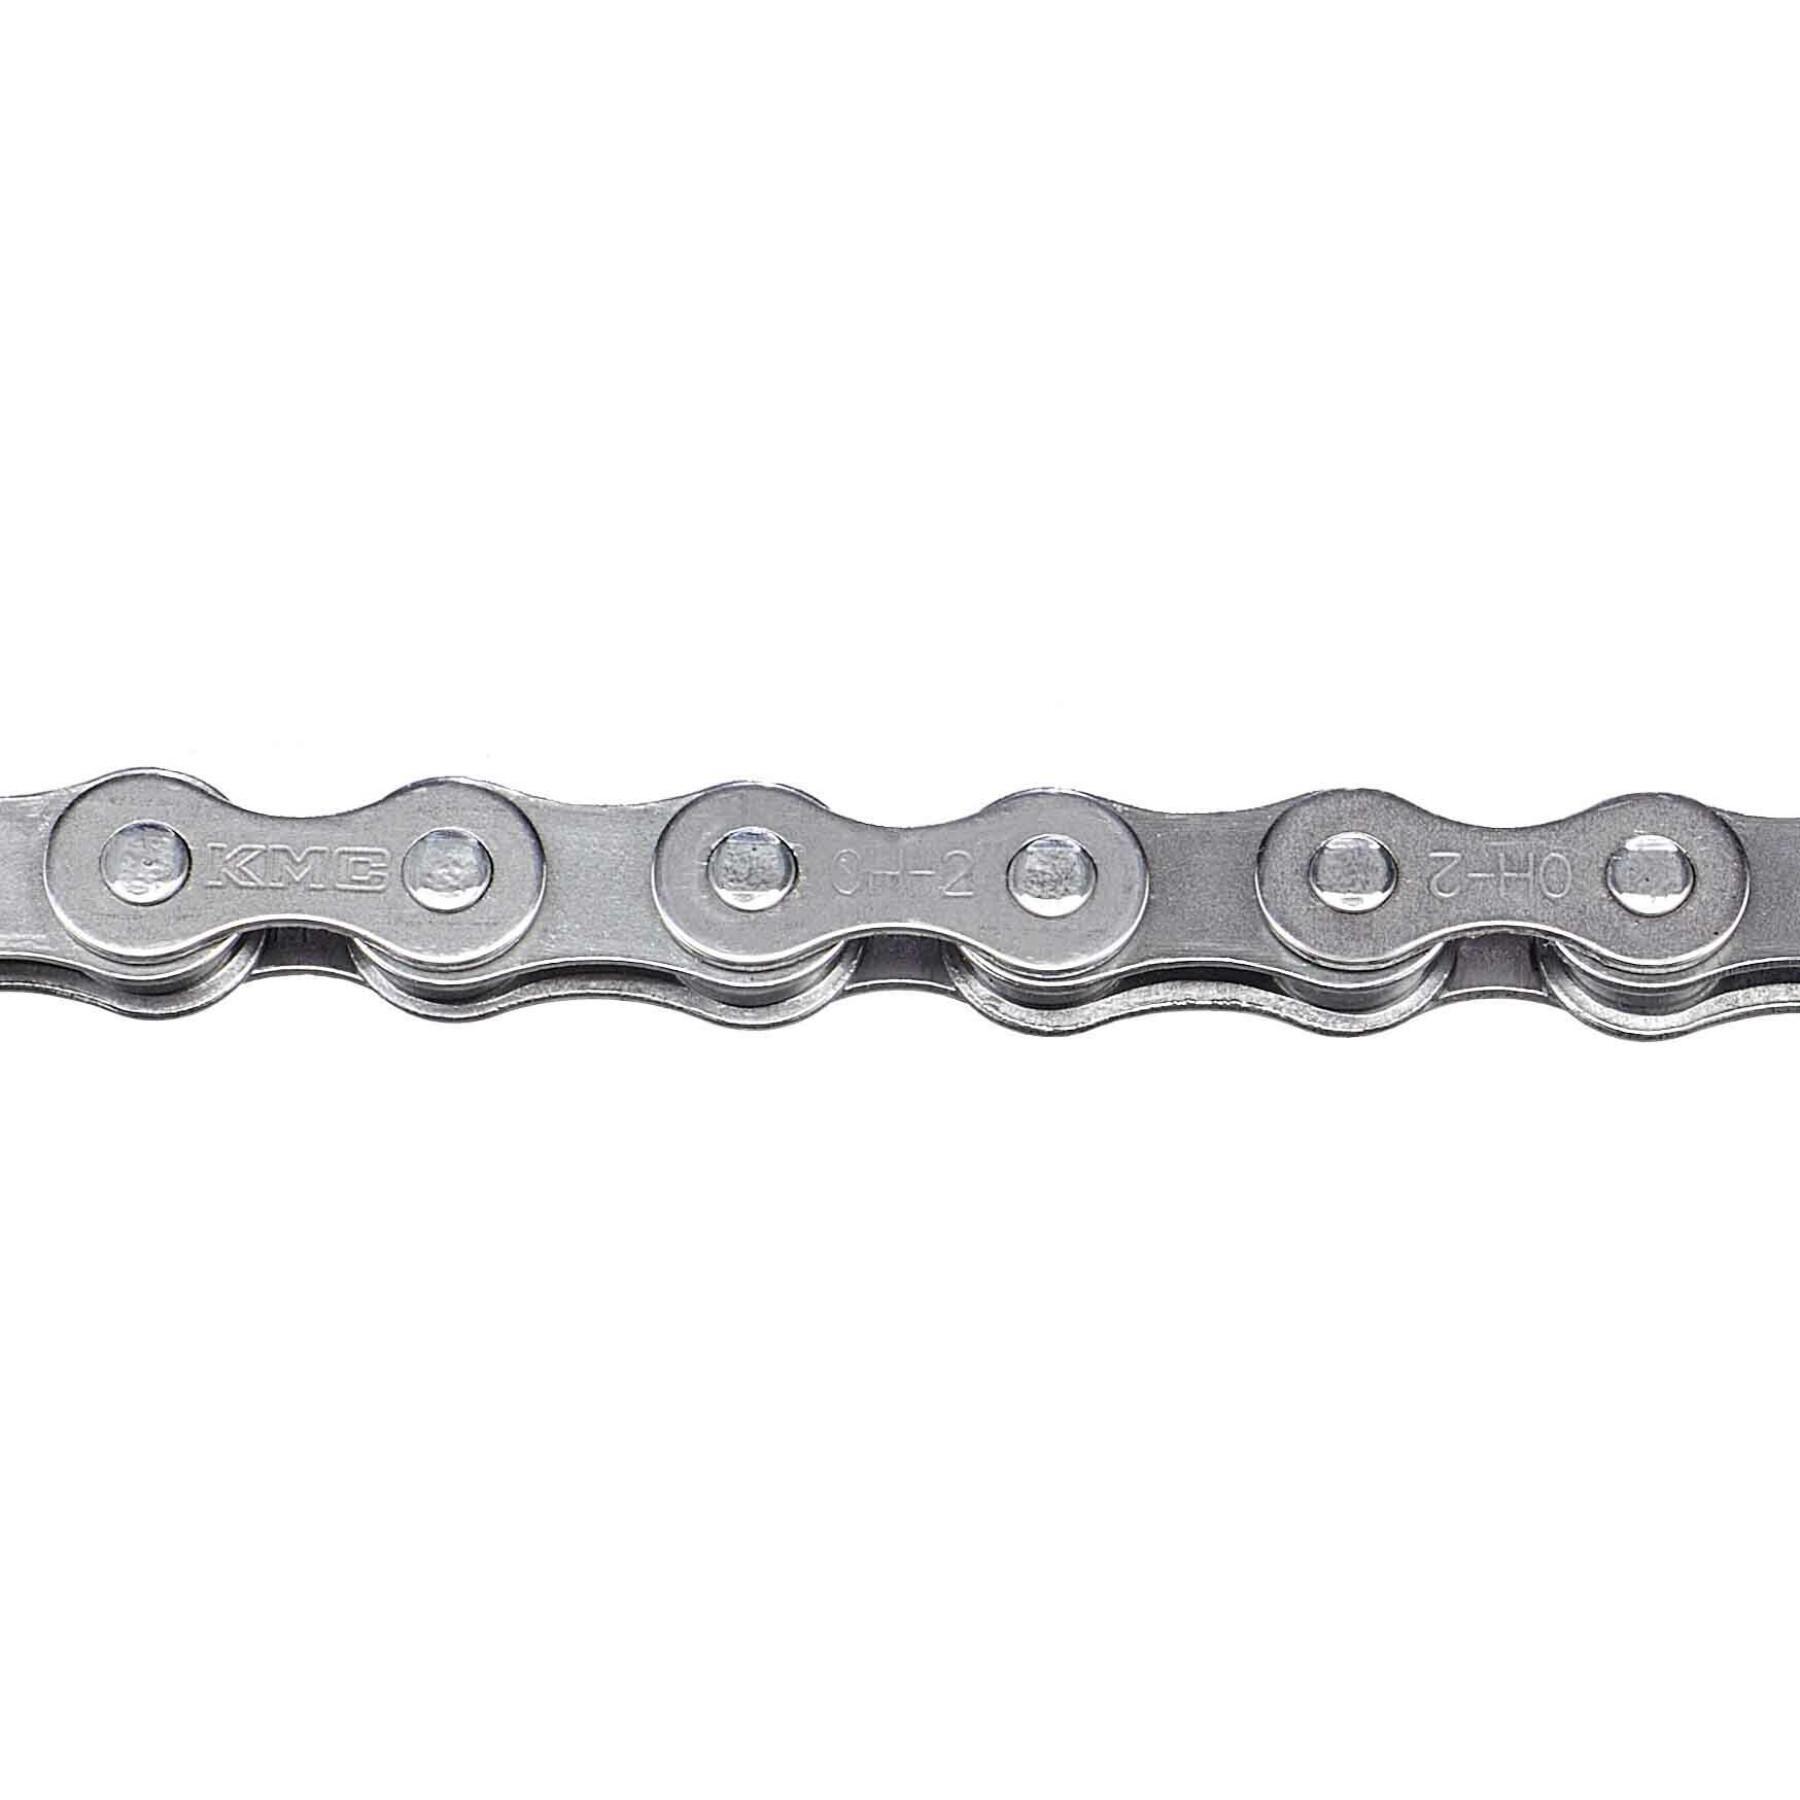 Wide chain KMC z1 ept 1/2 x 1/8, 112L longlife